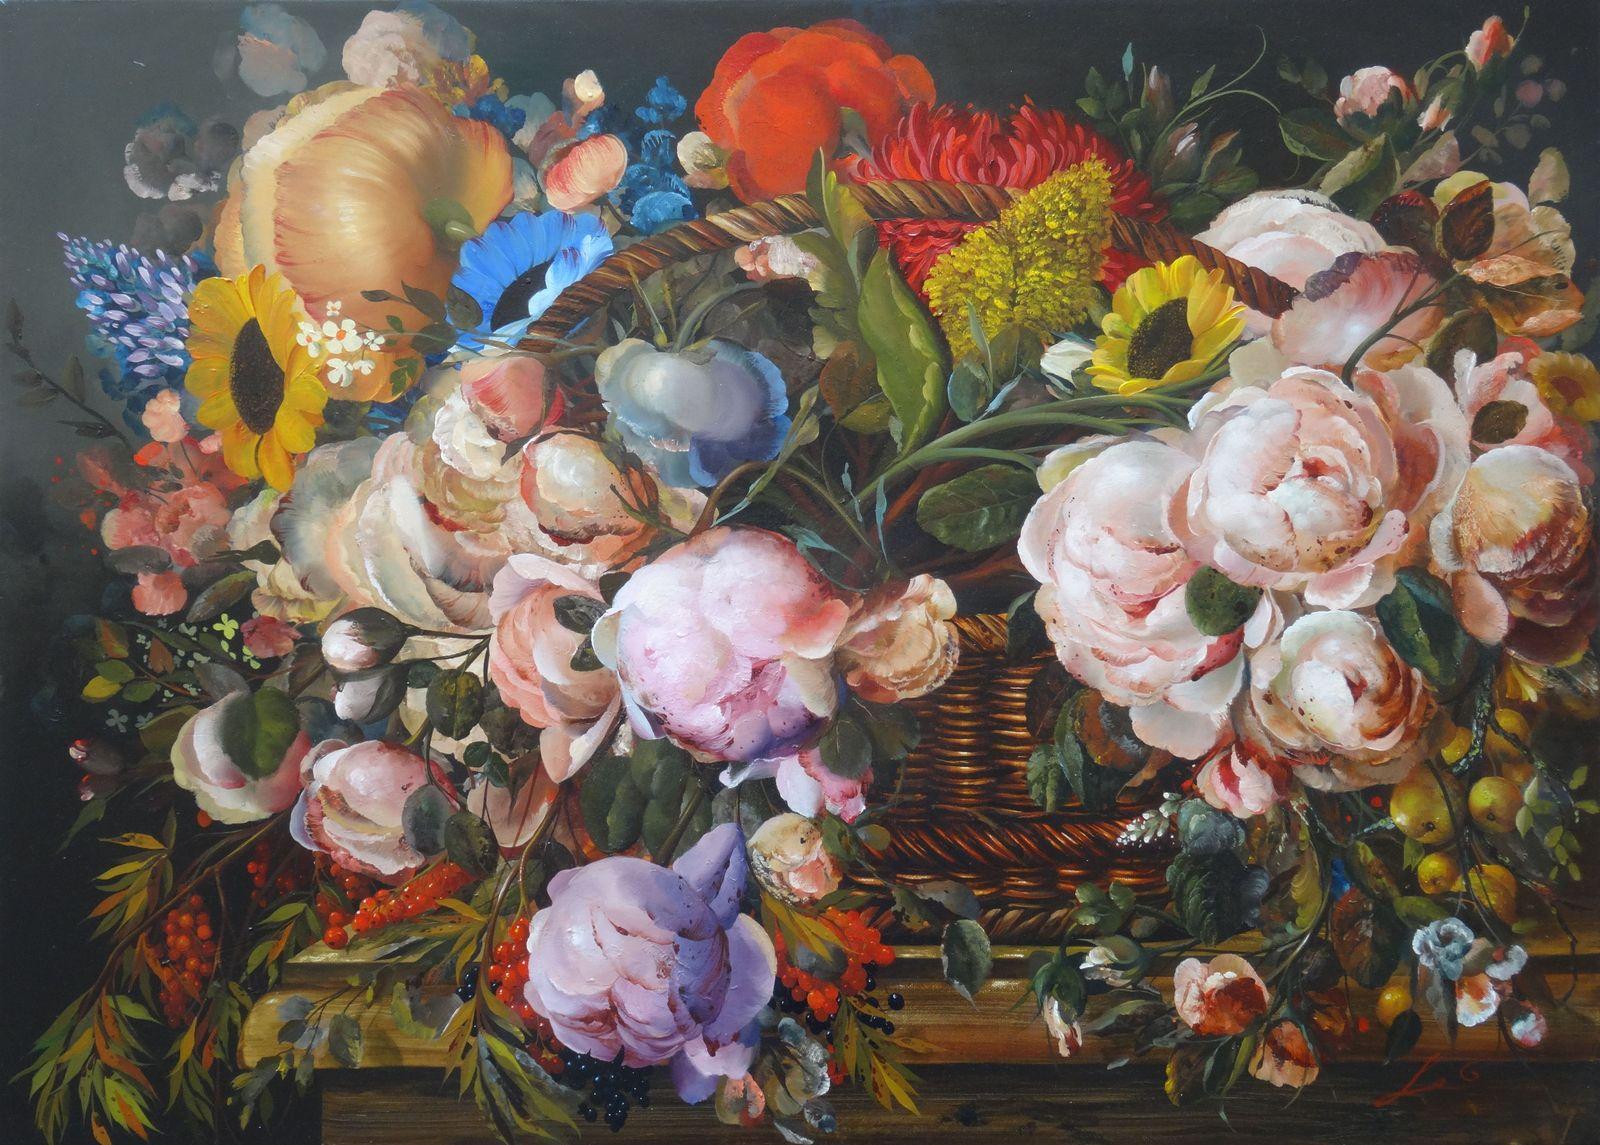 Still life with roses. 2019. Oil on canvas, 60x90 cm